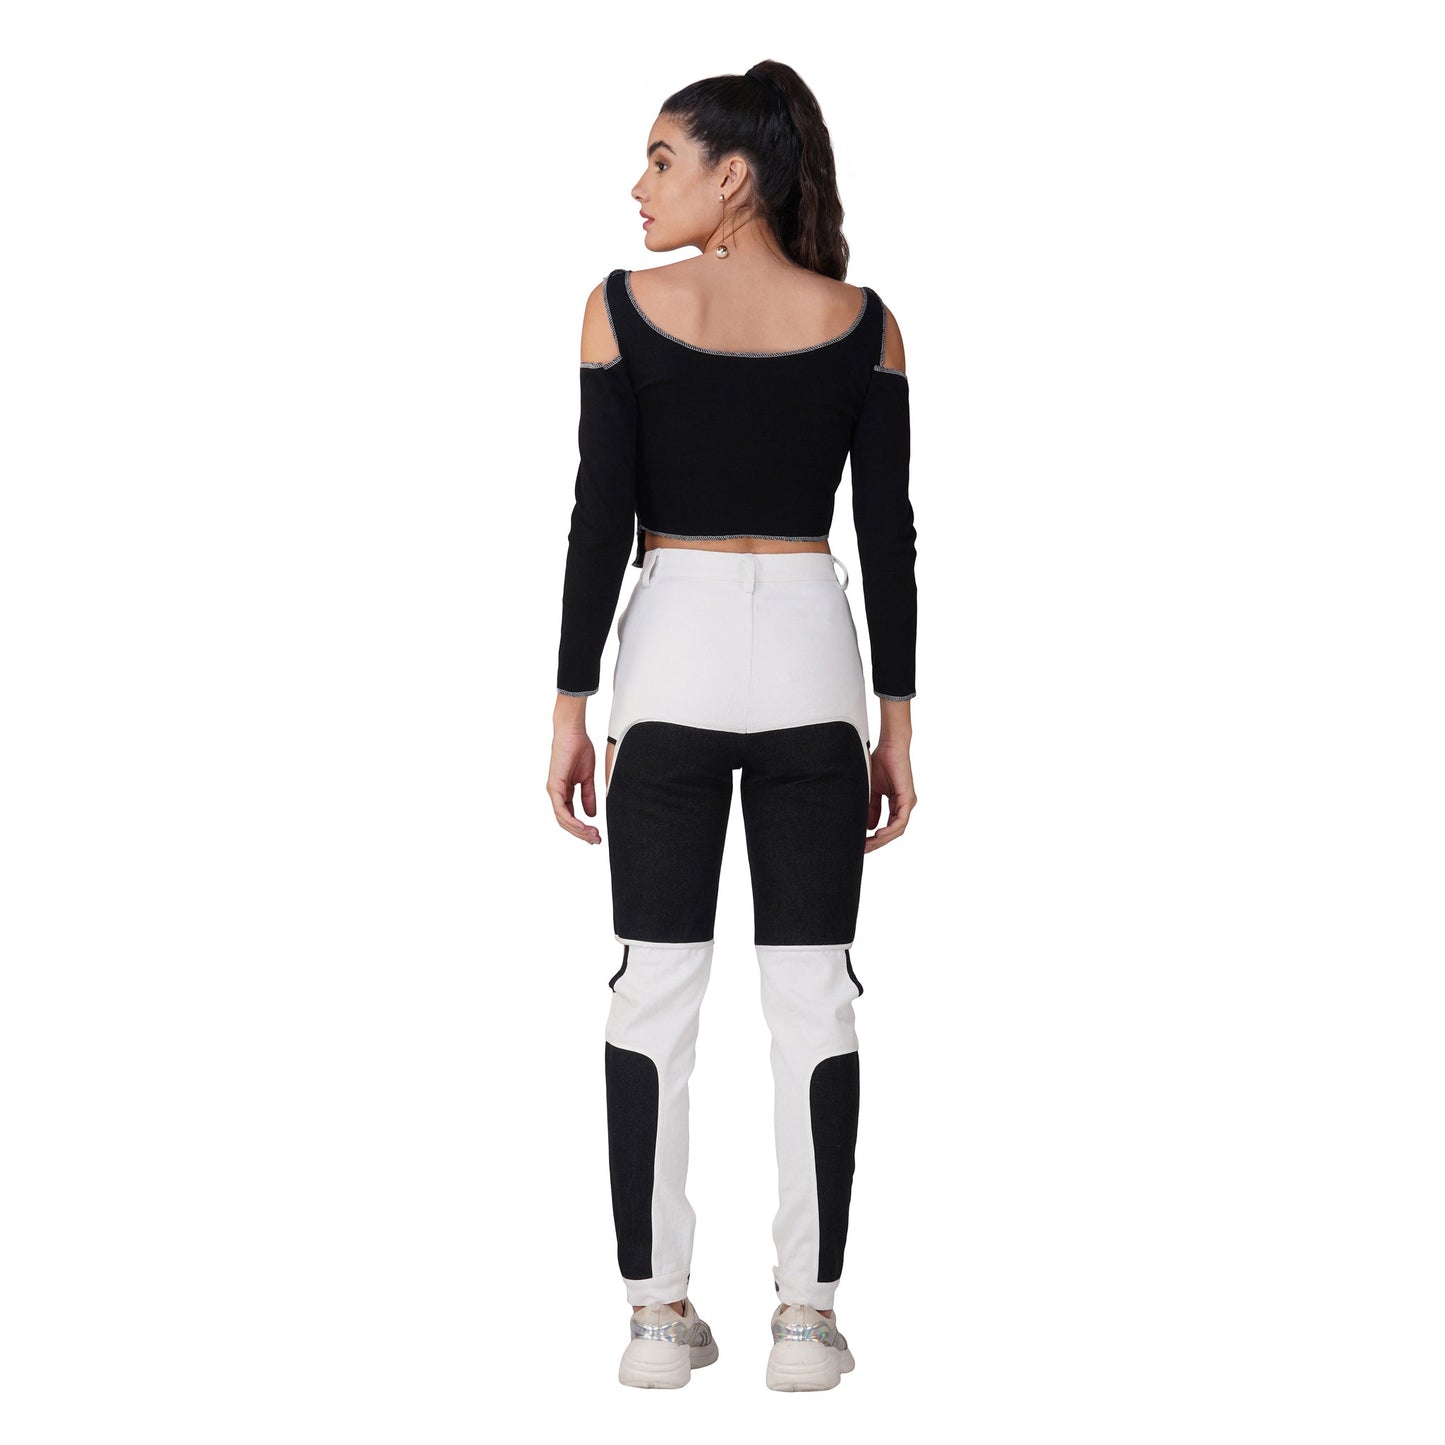 SLAY. Women's Contrast Stitch Black Cold Shoulder Rib Full Sleeves Top & Jeans Co-ord Set